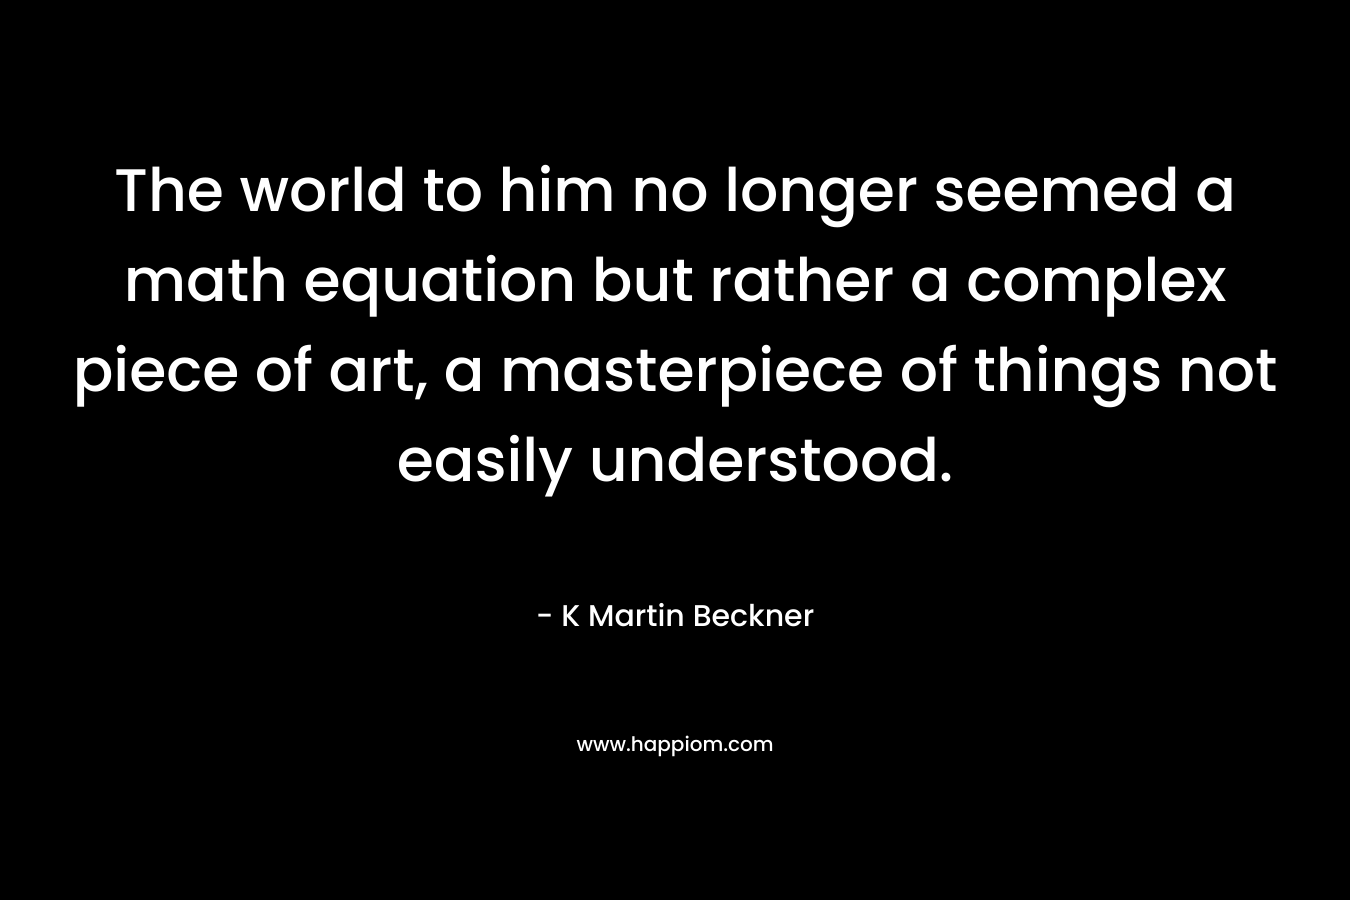 The world to him no longer seemed a math equation but rather a complex piece of art, a masterpiece of things not easily understood. – K Martin Beckner